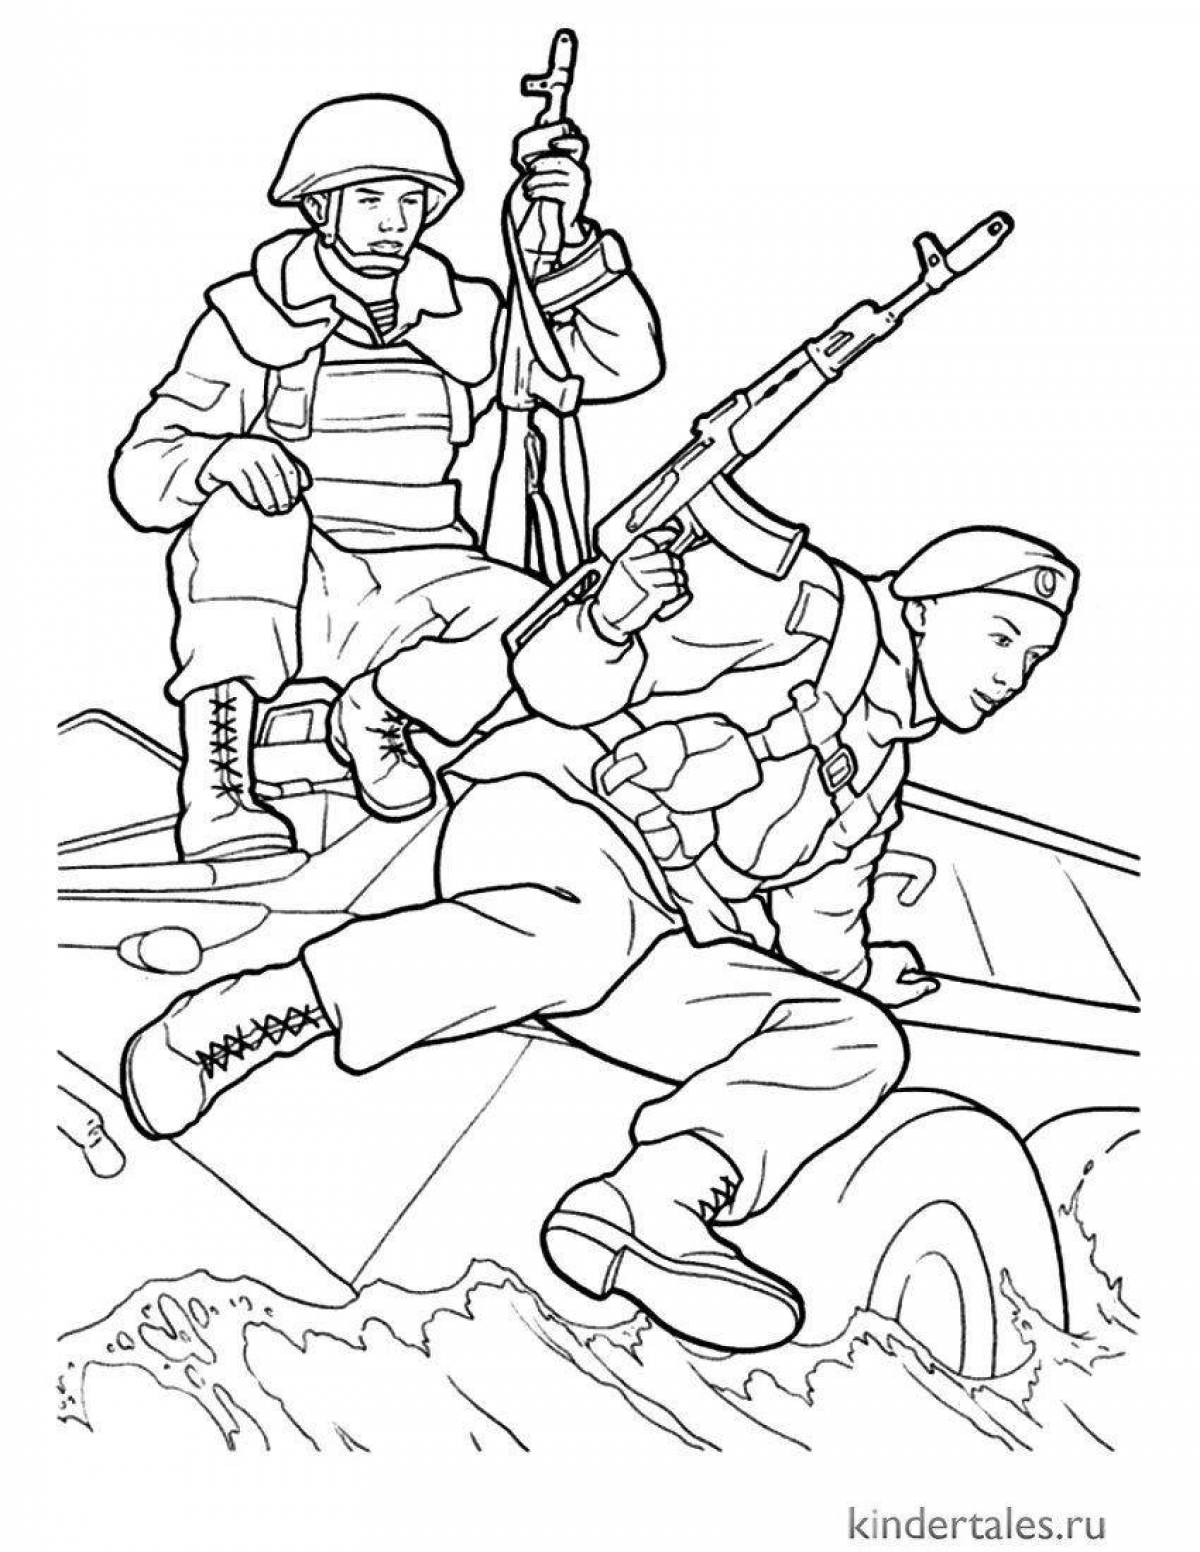 On a military theme for children to school #8